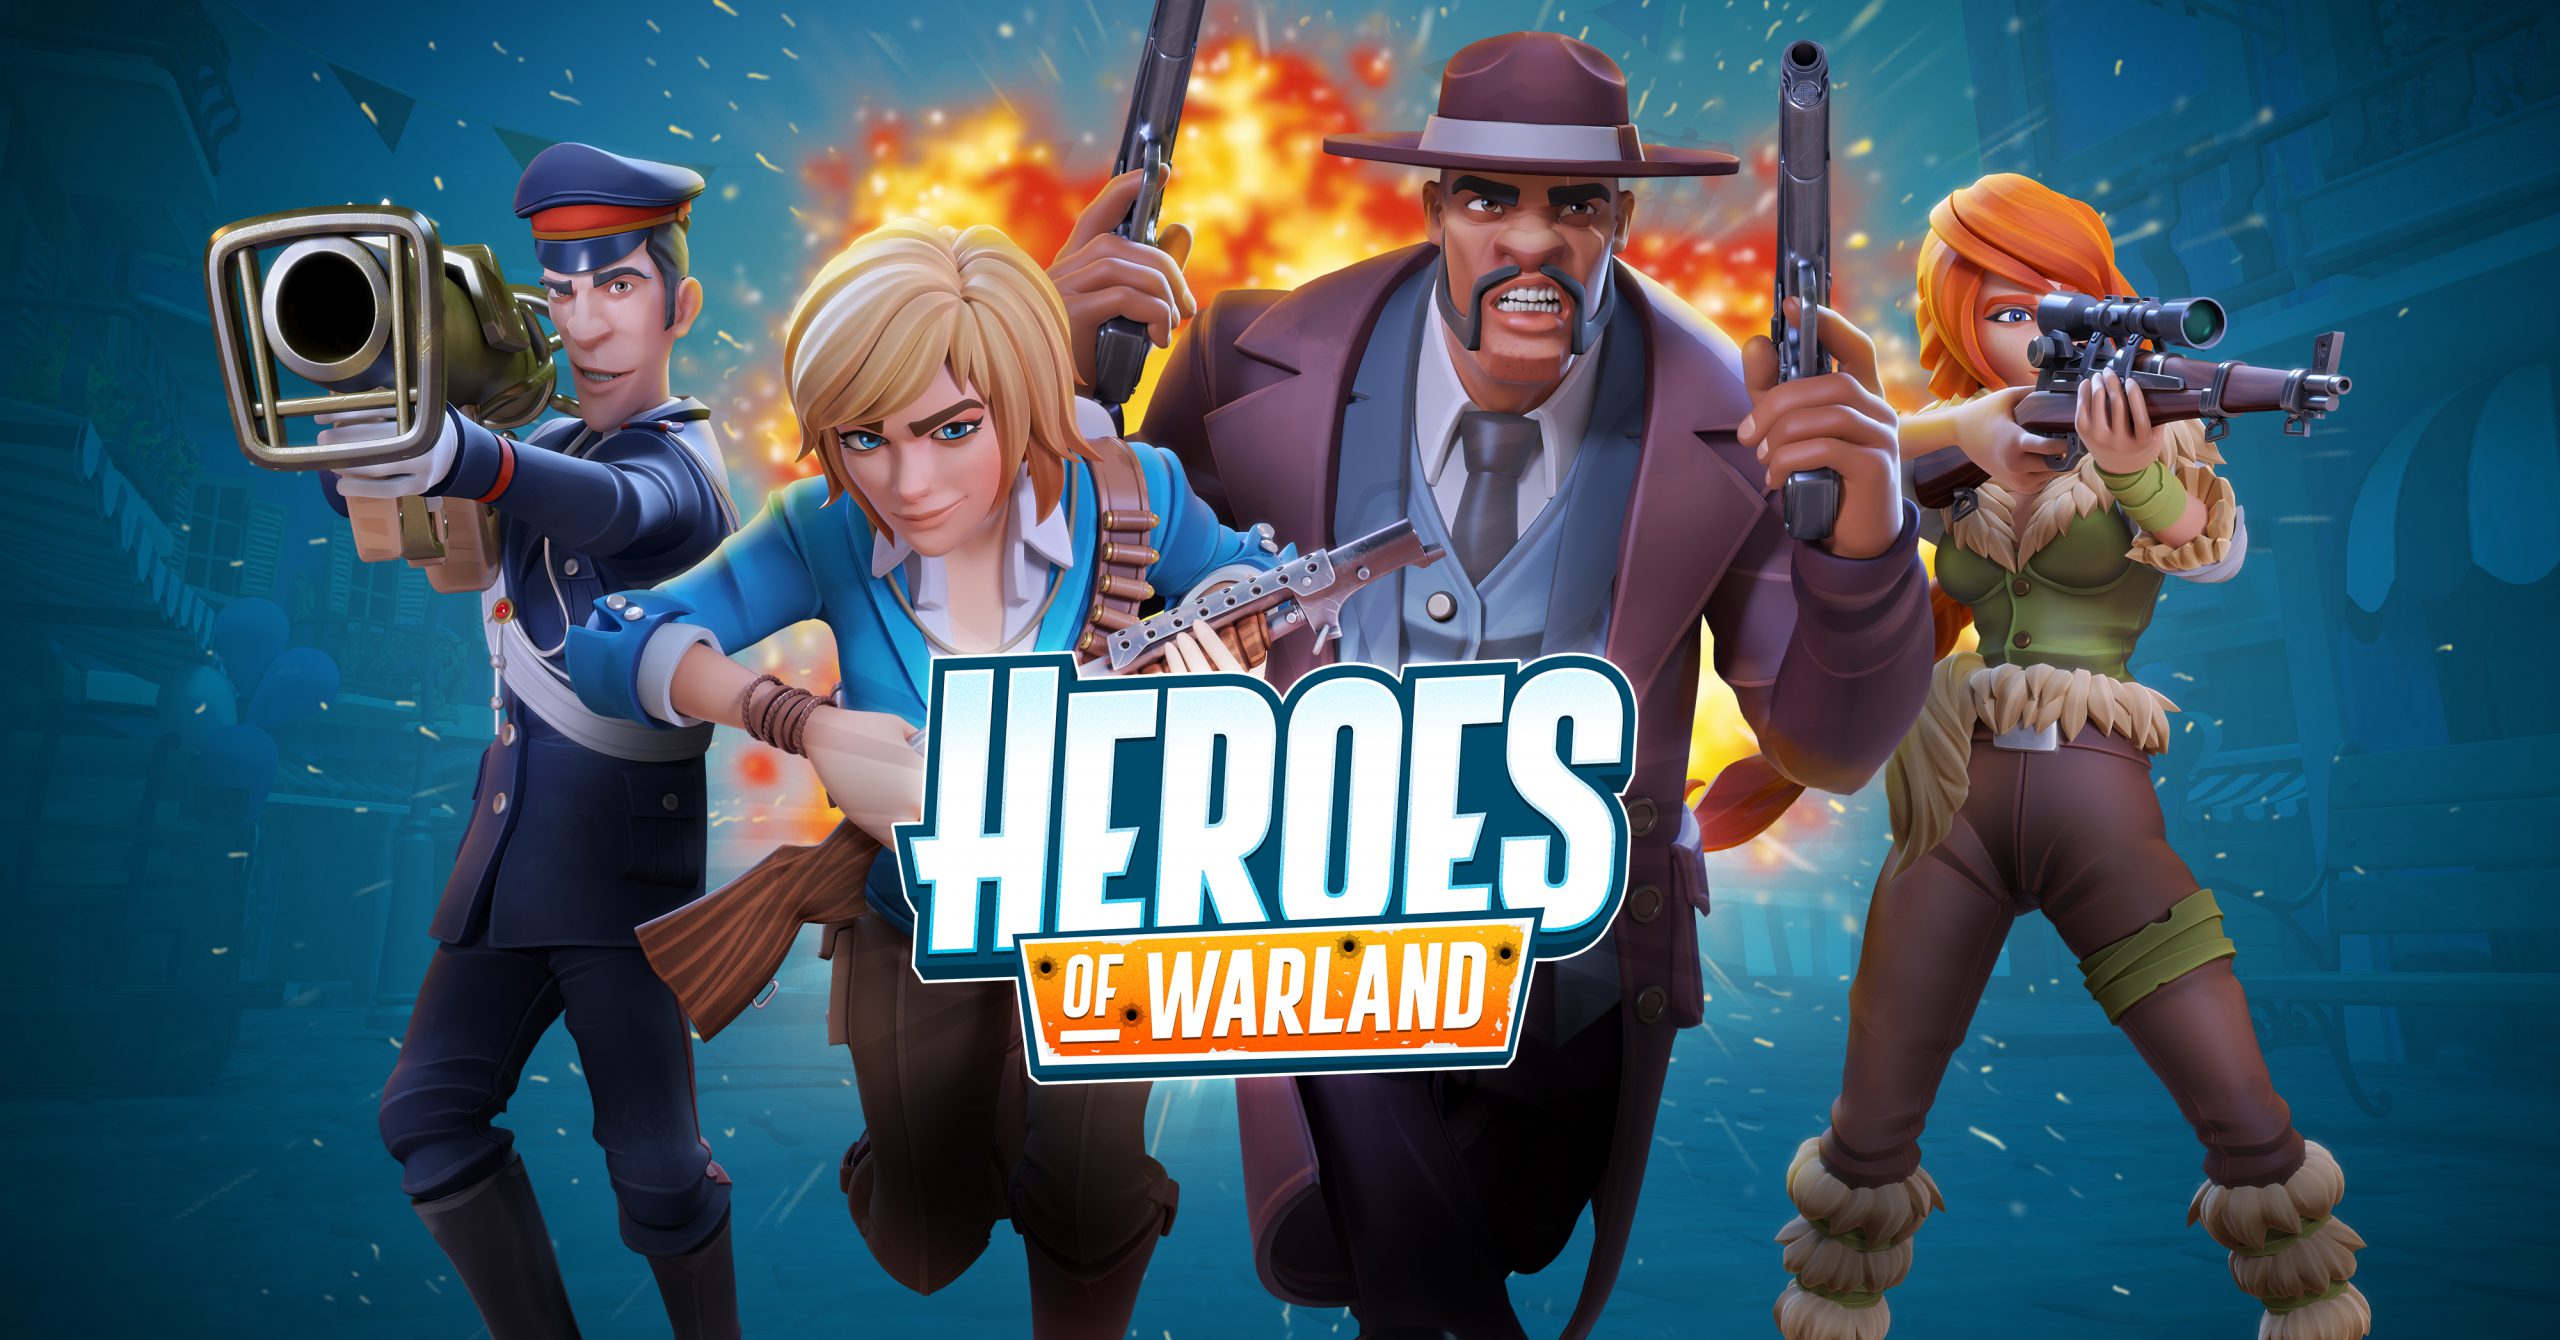 Heroes of Warland playtested by Antidote